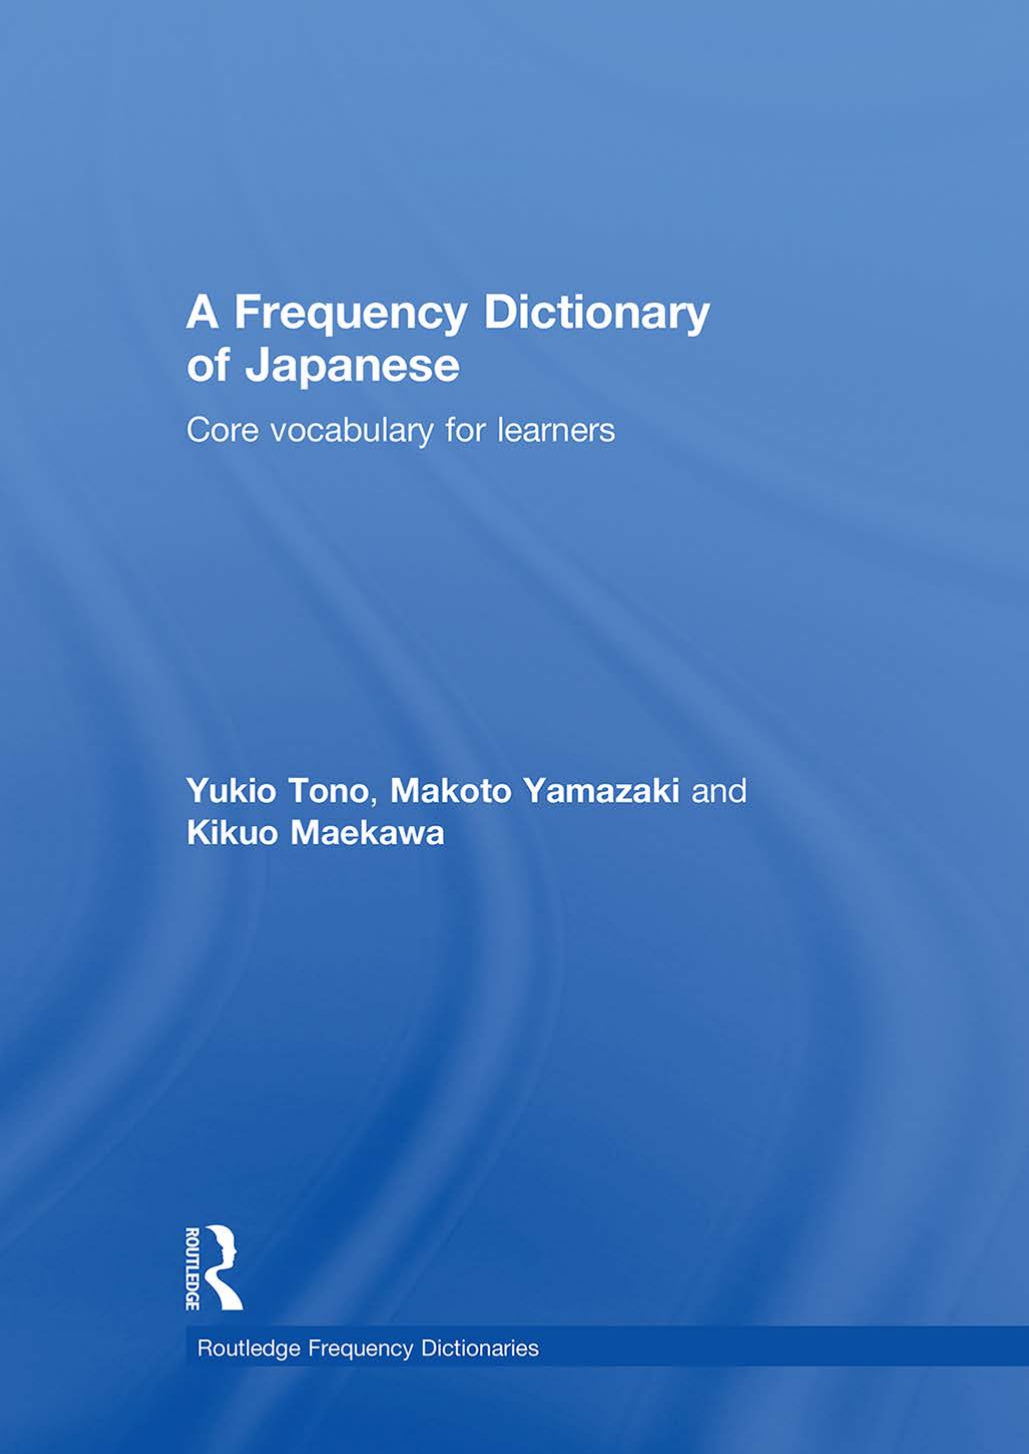 A FREQUENCY DICTIONARY OF JAPANESE